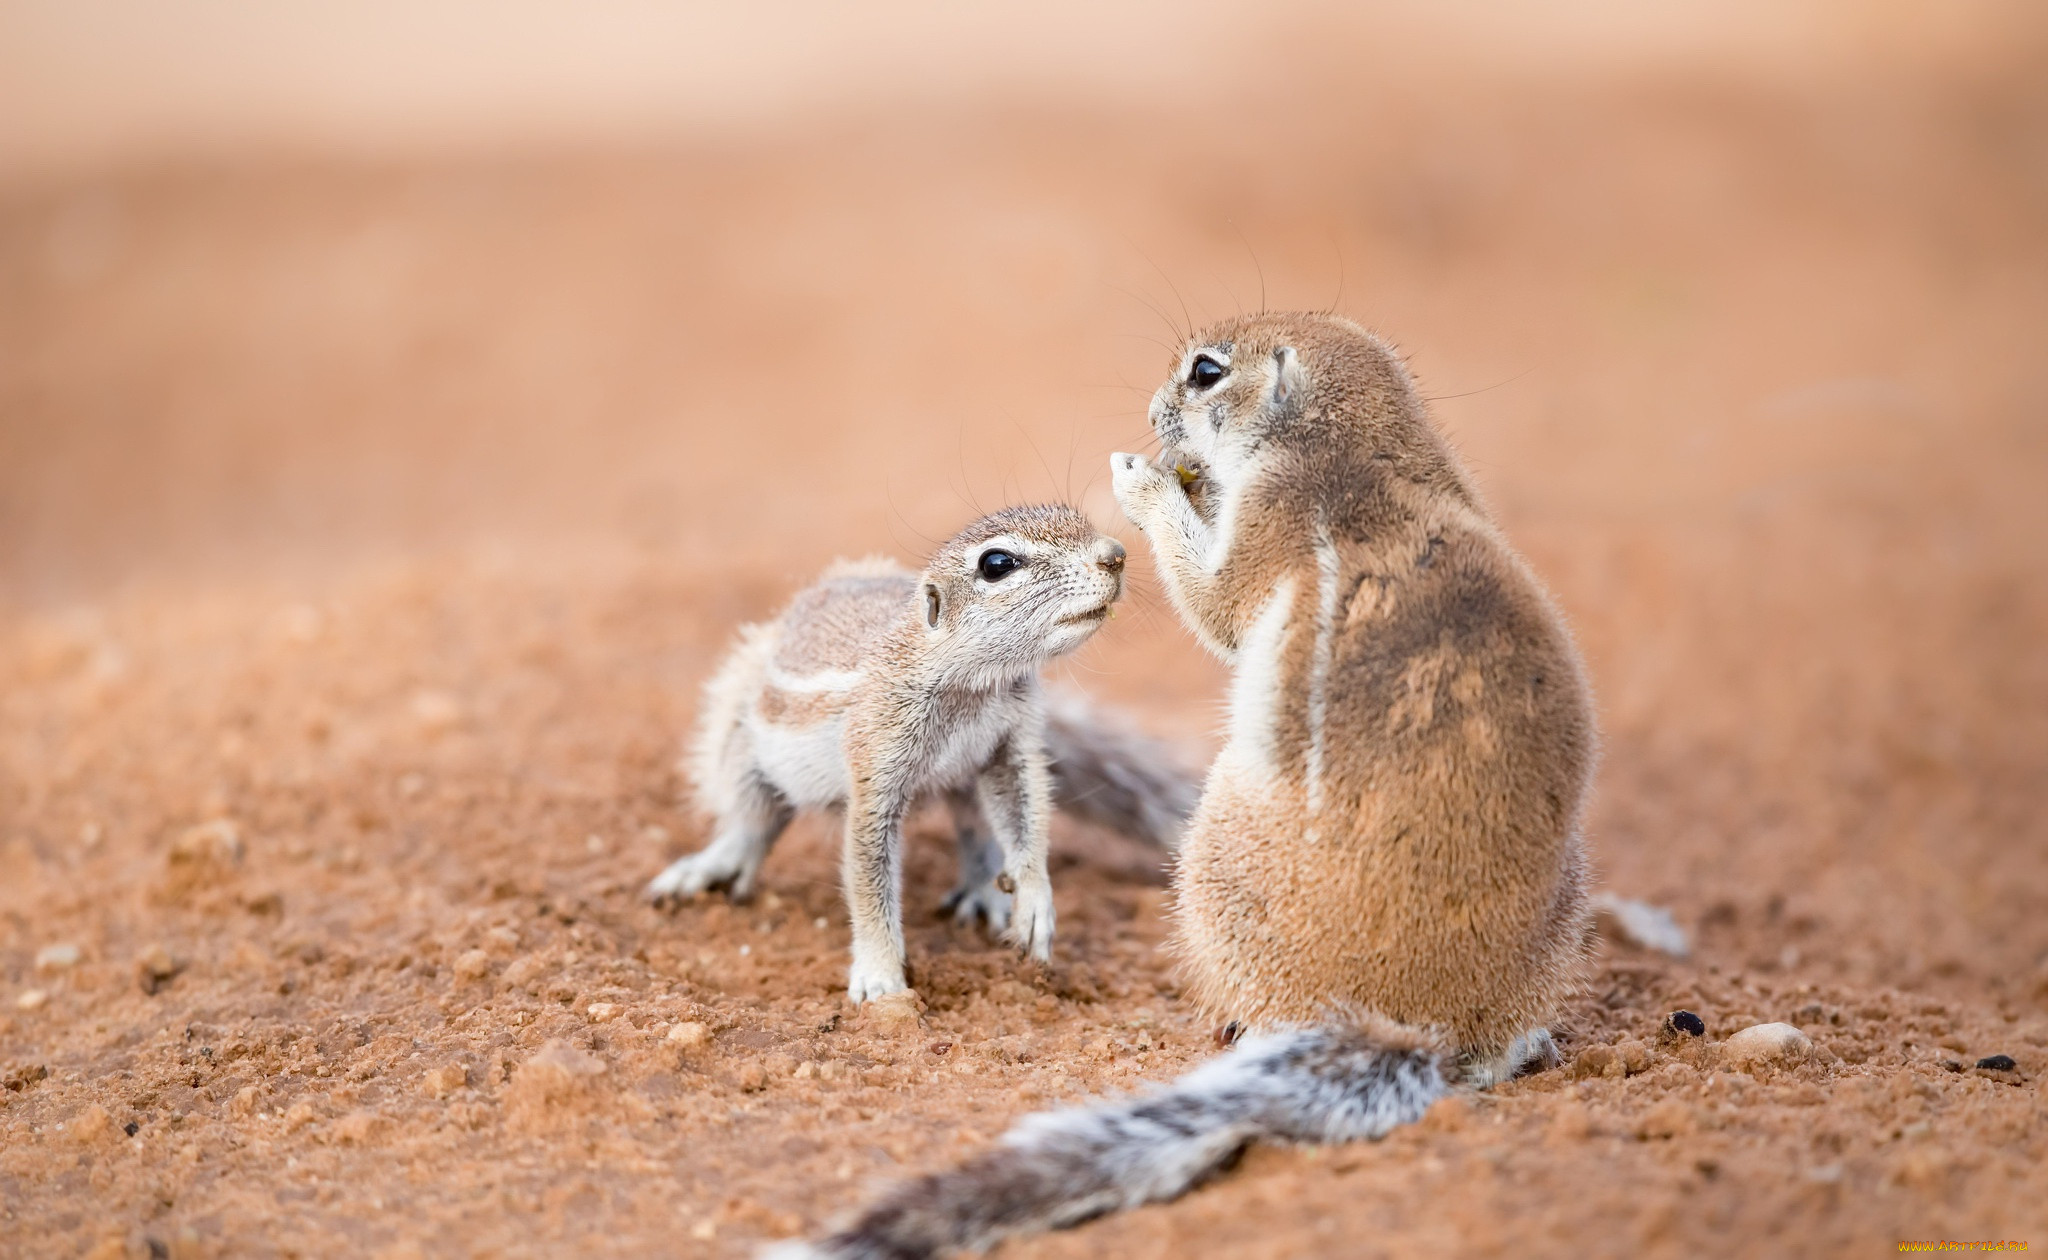 , ,  ,  ,  ,  , southern, african, ground, squirrels